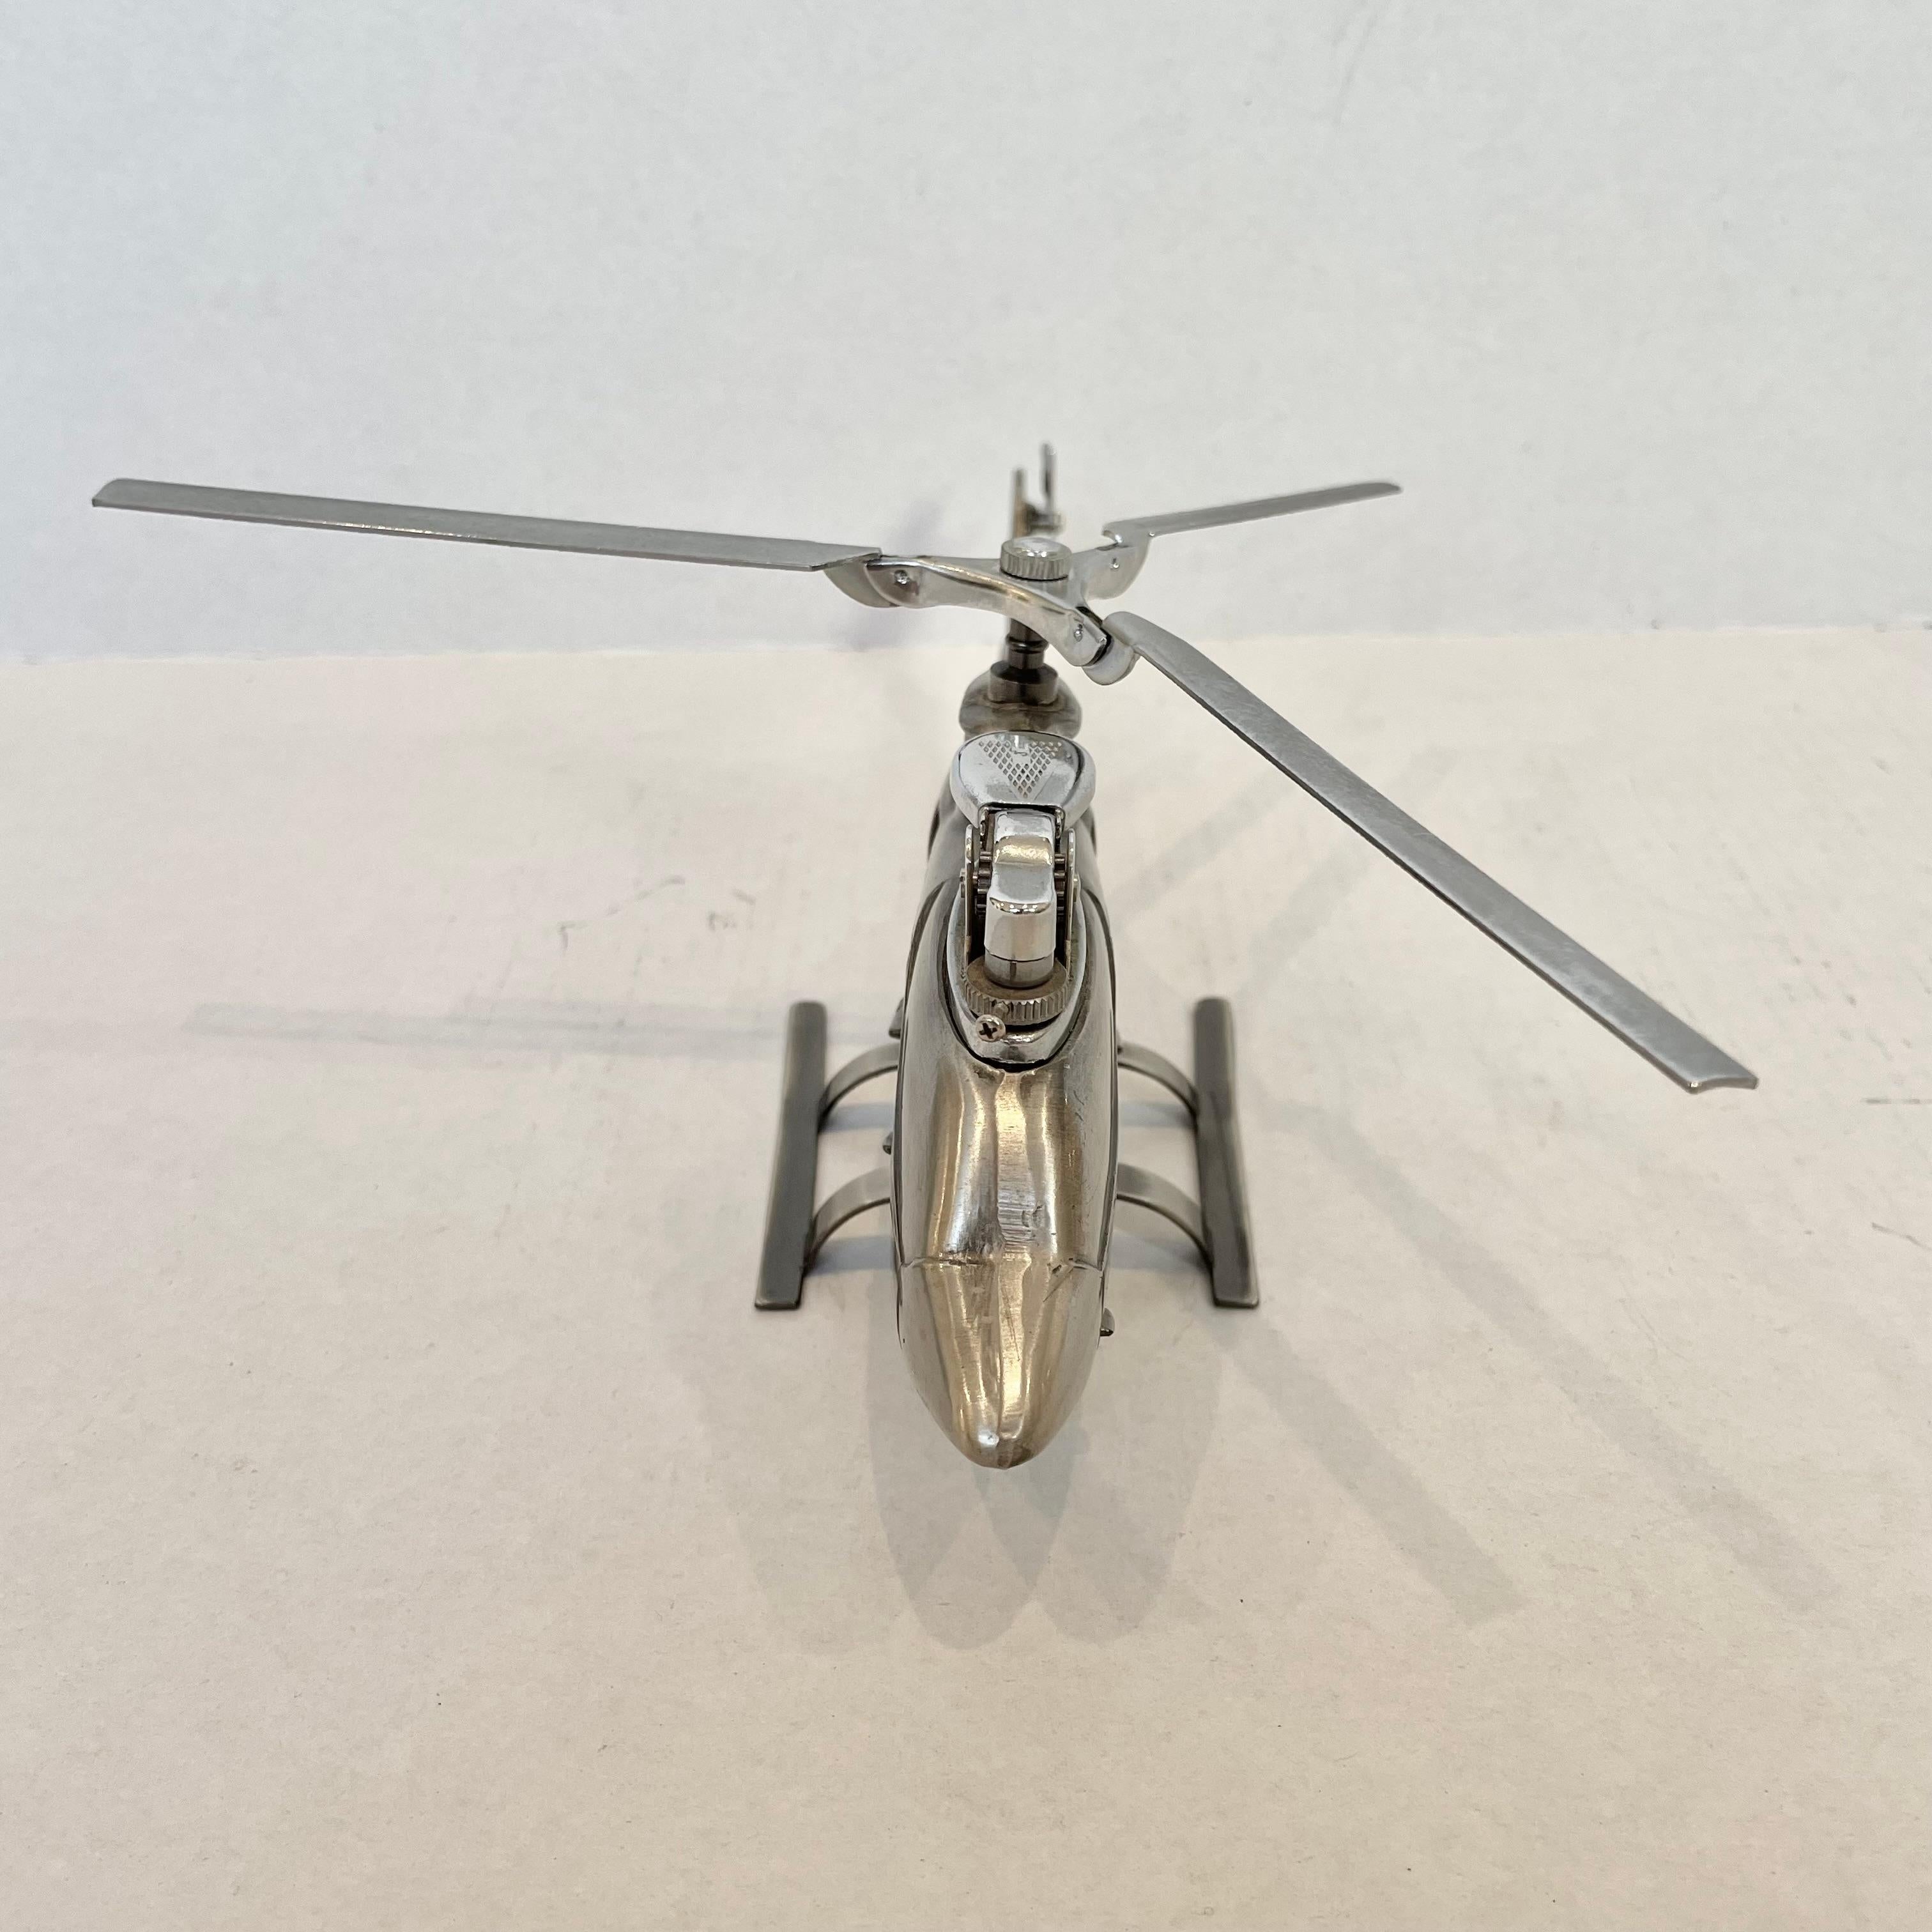 Cool vintage table lighter in the shape of a Huey Cobra Helicopter. Made in Japan, 1980s. This piece has great balance and details like propellers that spin and fold up. Cool tobacco accessory and conversation piece. Working lighter. Good vintage